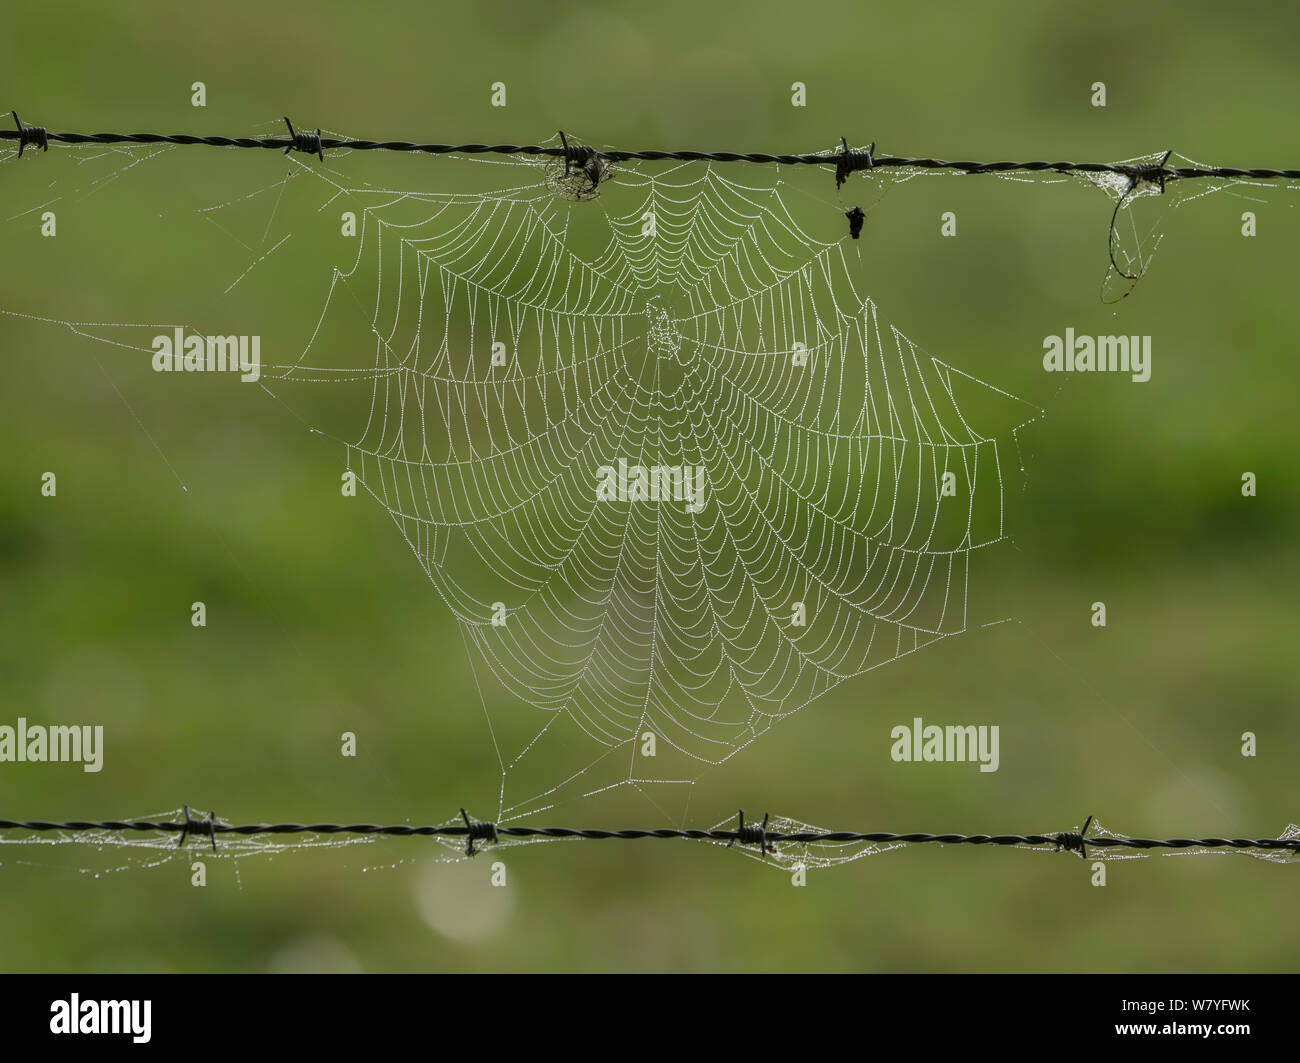 Dew-covered cobweb between strands of barbed wire, Ribemont, Oise, France, September. Stock Photo